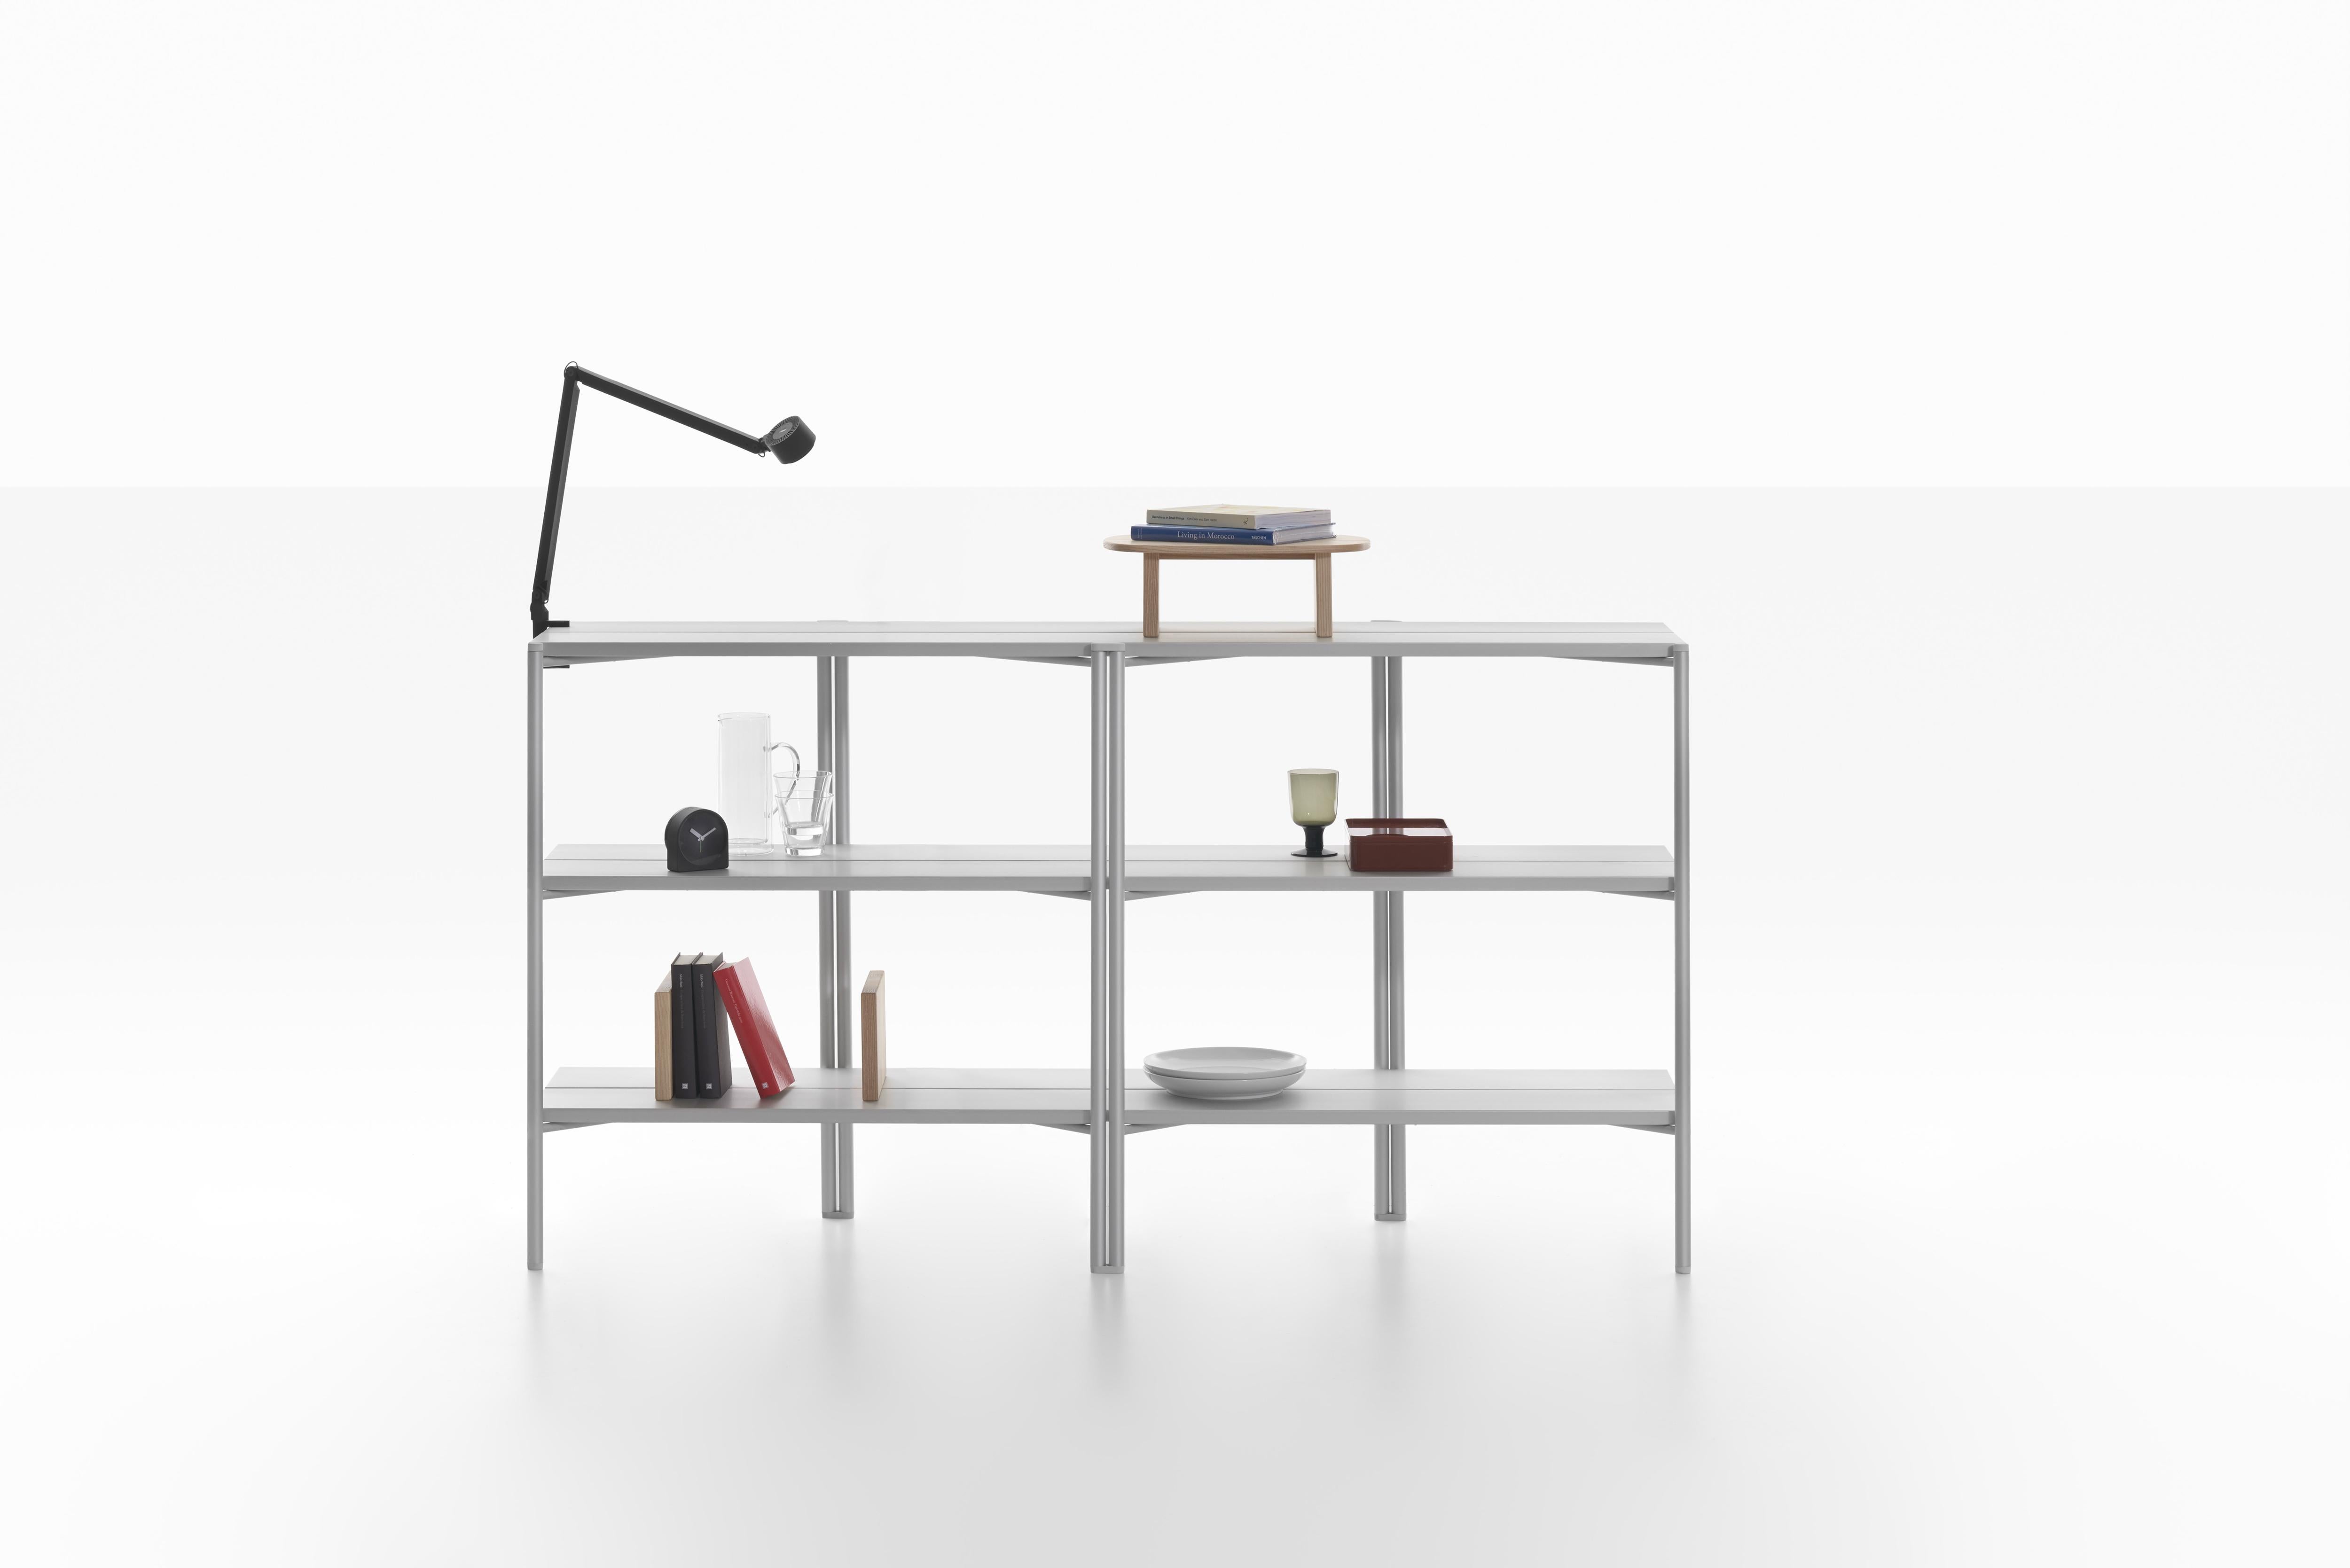 Contemporary Emeco Run Shelf in Black Powder-Coat and Walnut by Sam Hecht & Kim Colin For Sale